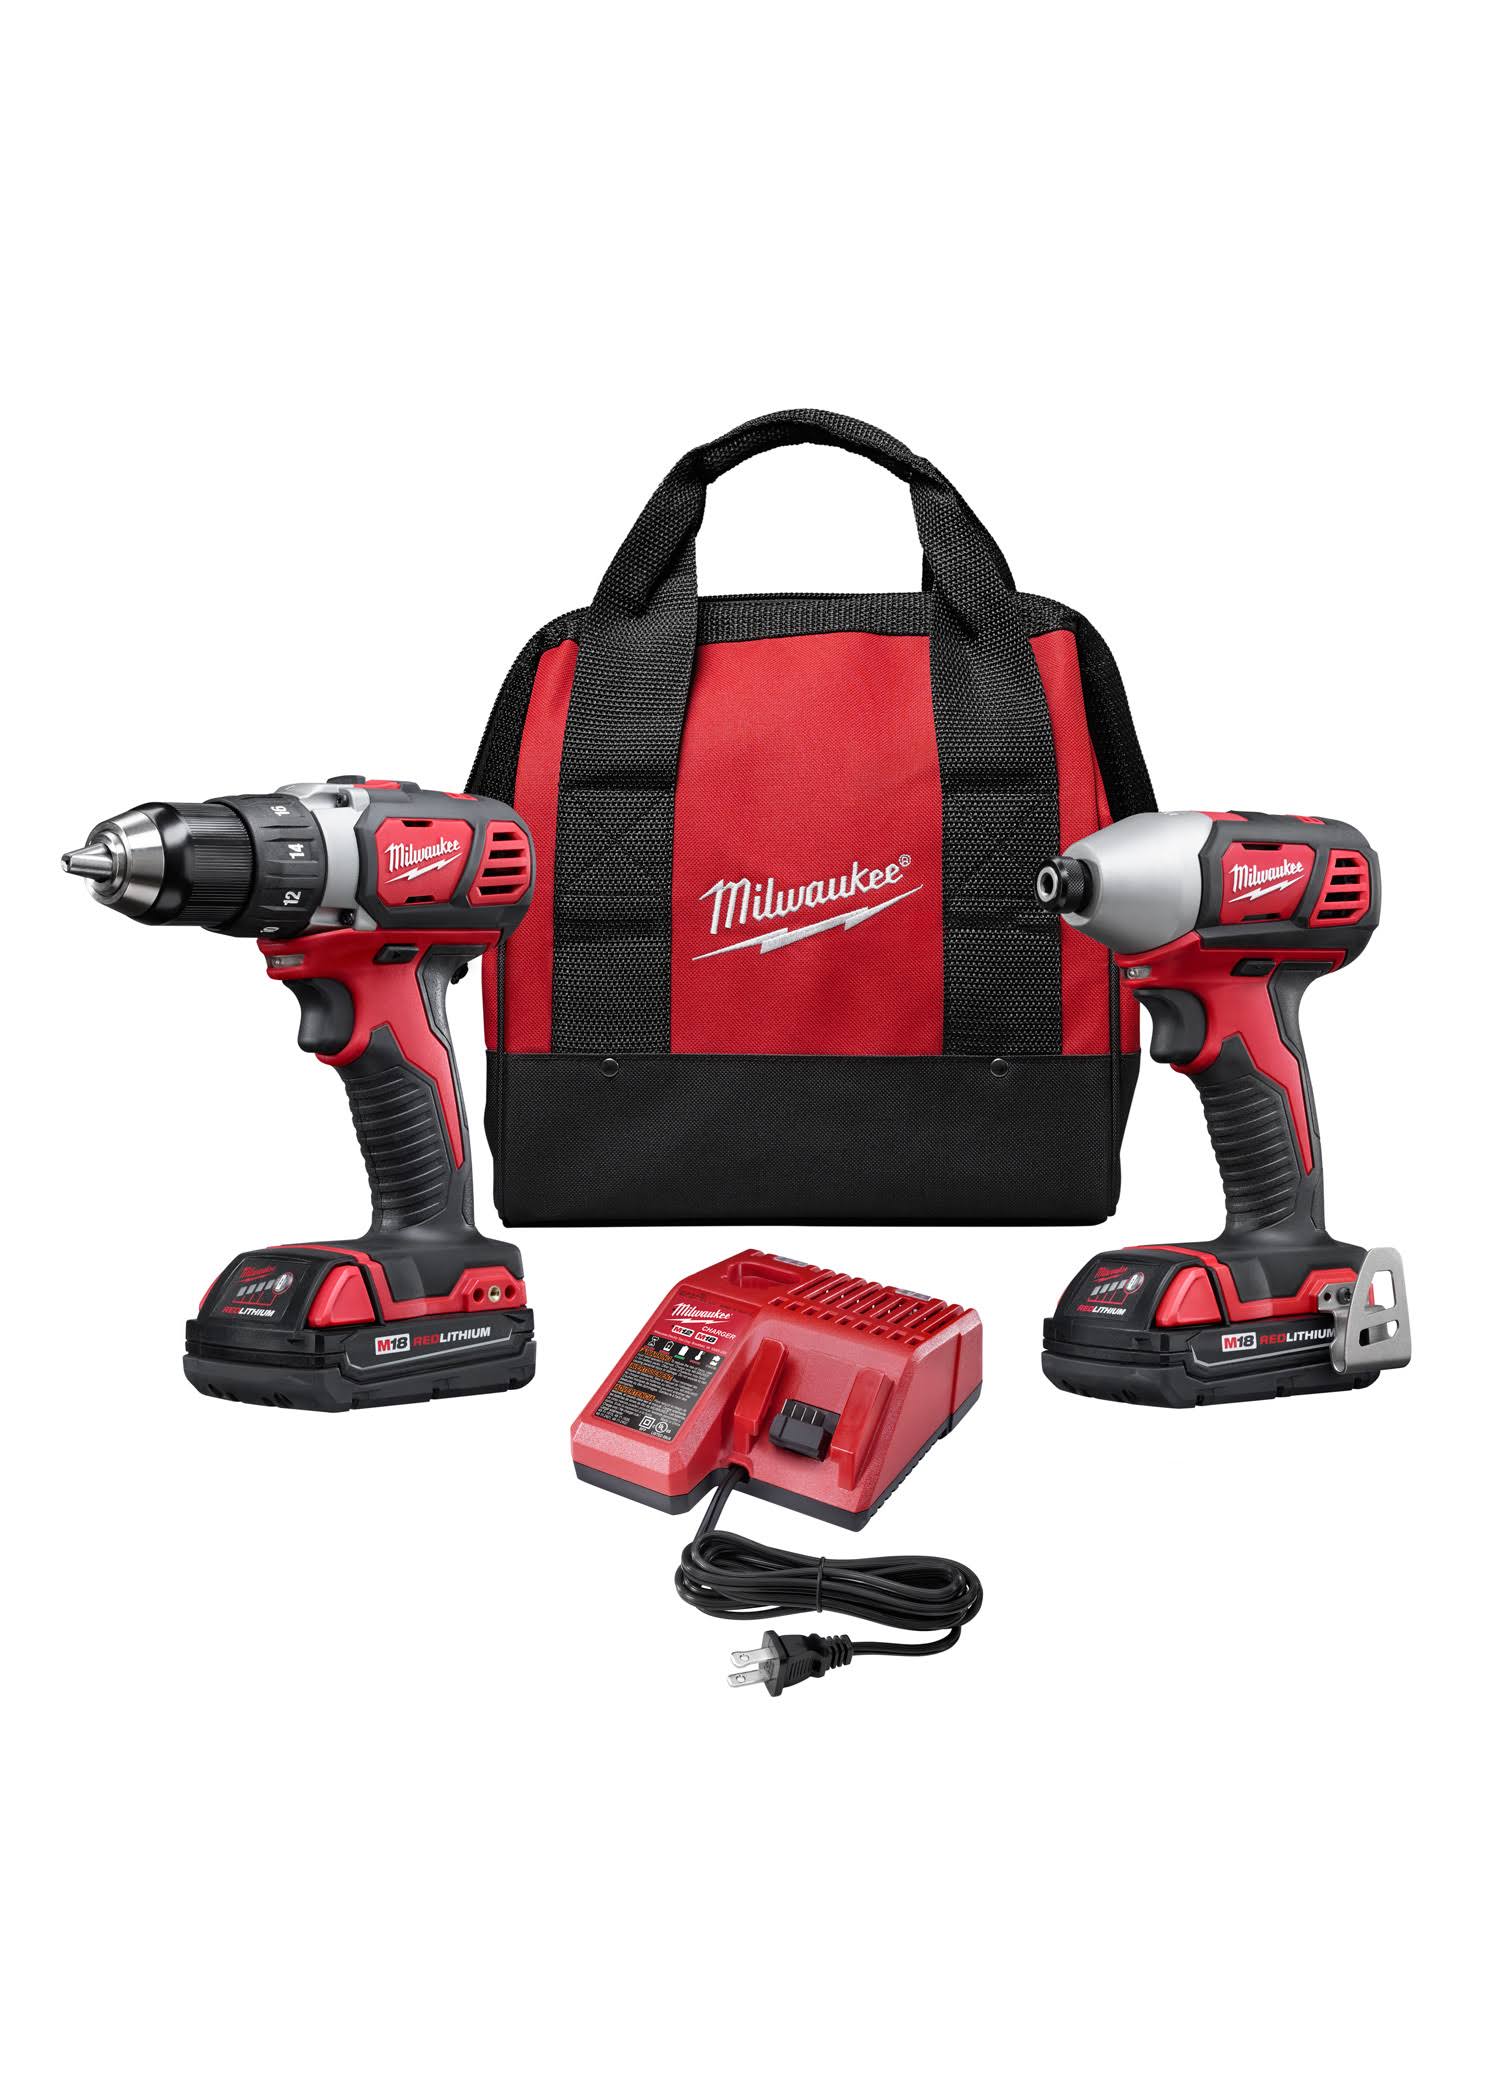 Milwaukee M18 Drill And Impact Driver Combo Kit